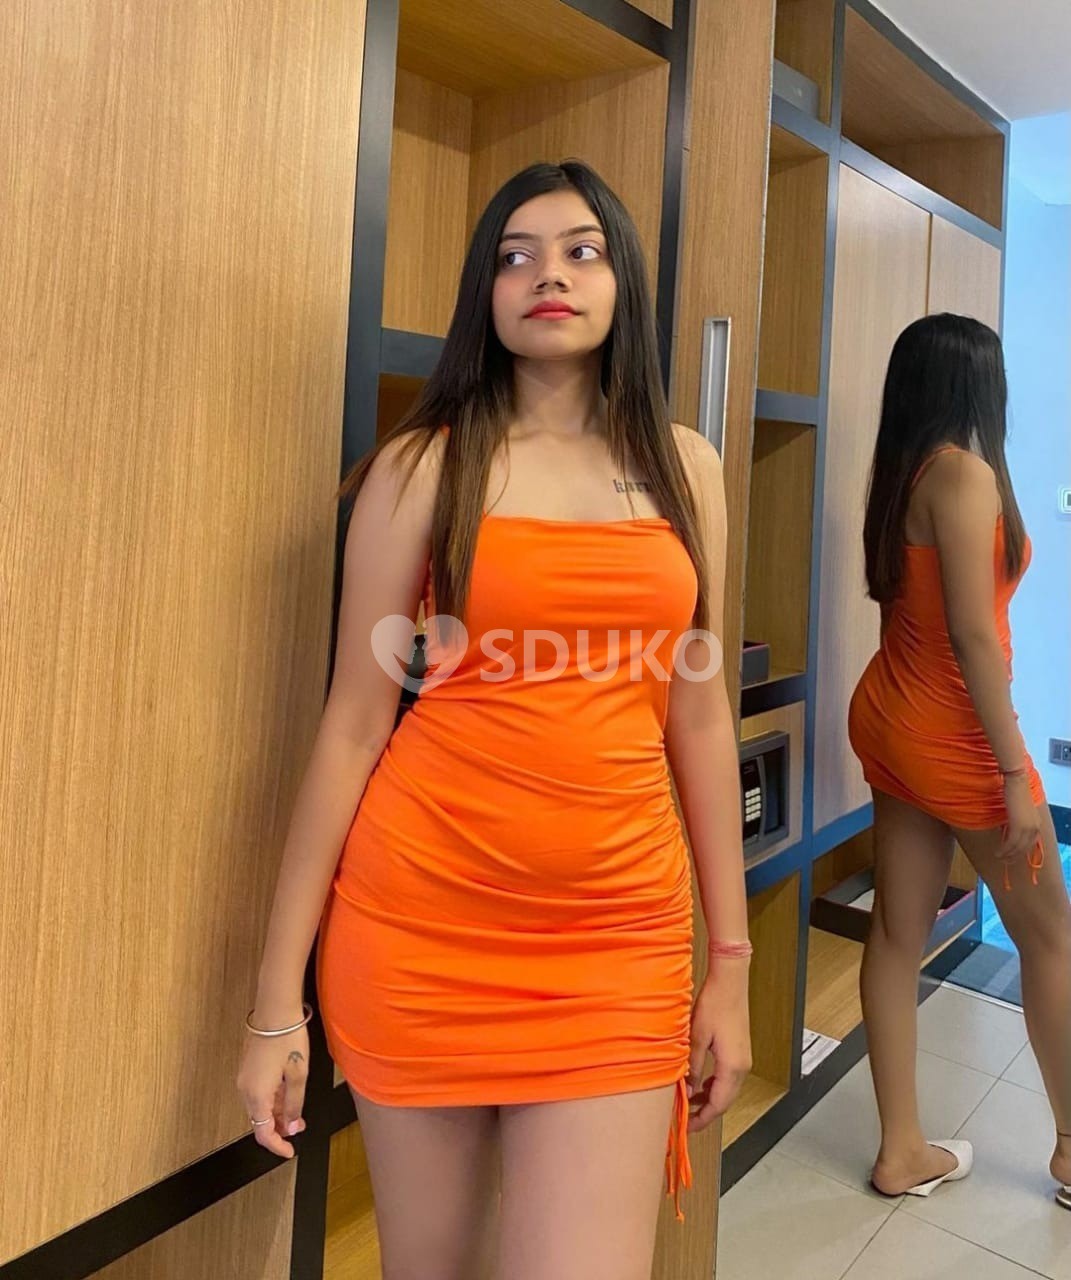 ❣️MALVIYA NAGAR BEST VIP HIGH PROFILE COLLEGE GIRLS HOUSEWIFE HOTEL AND HOME SERVICE AVAILABLE call me